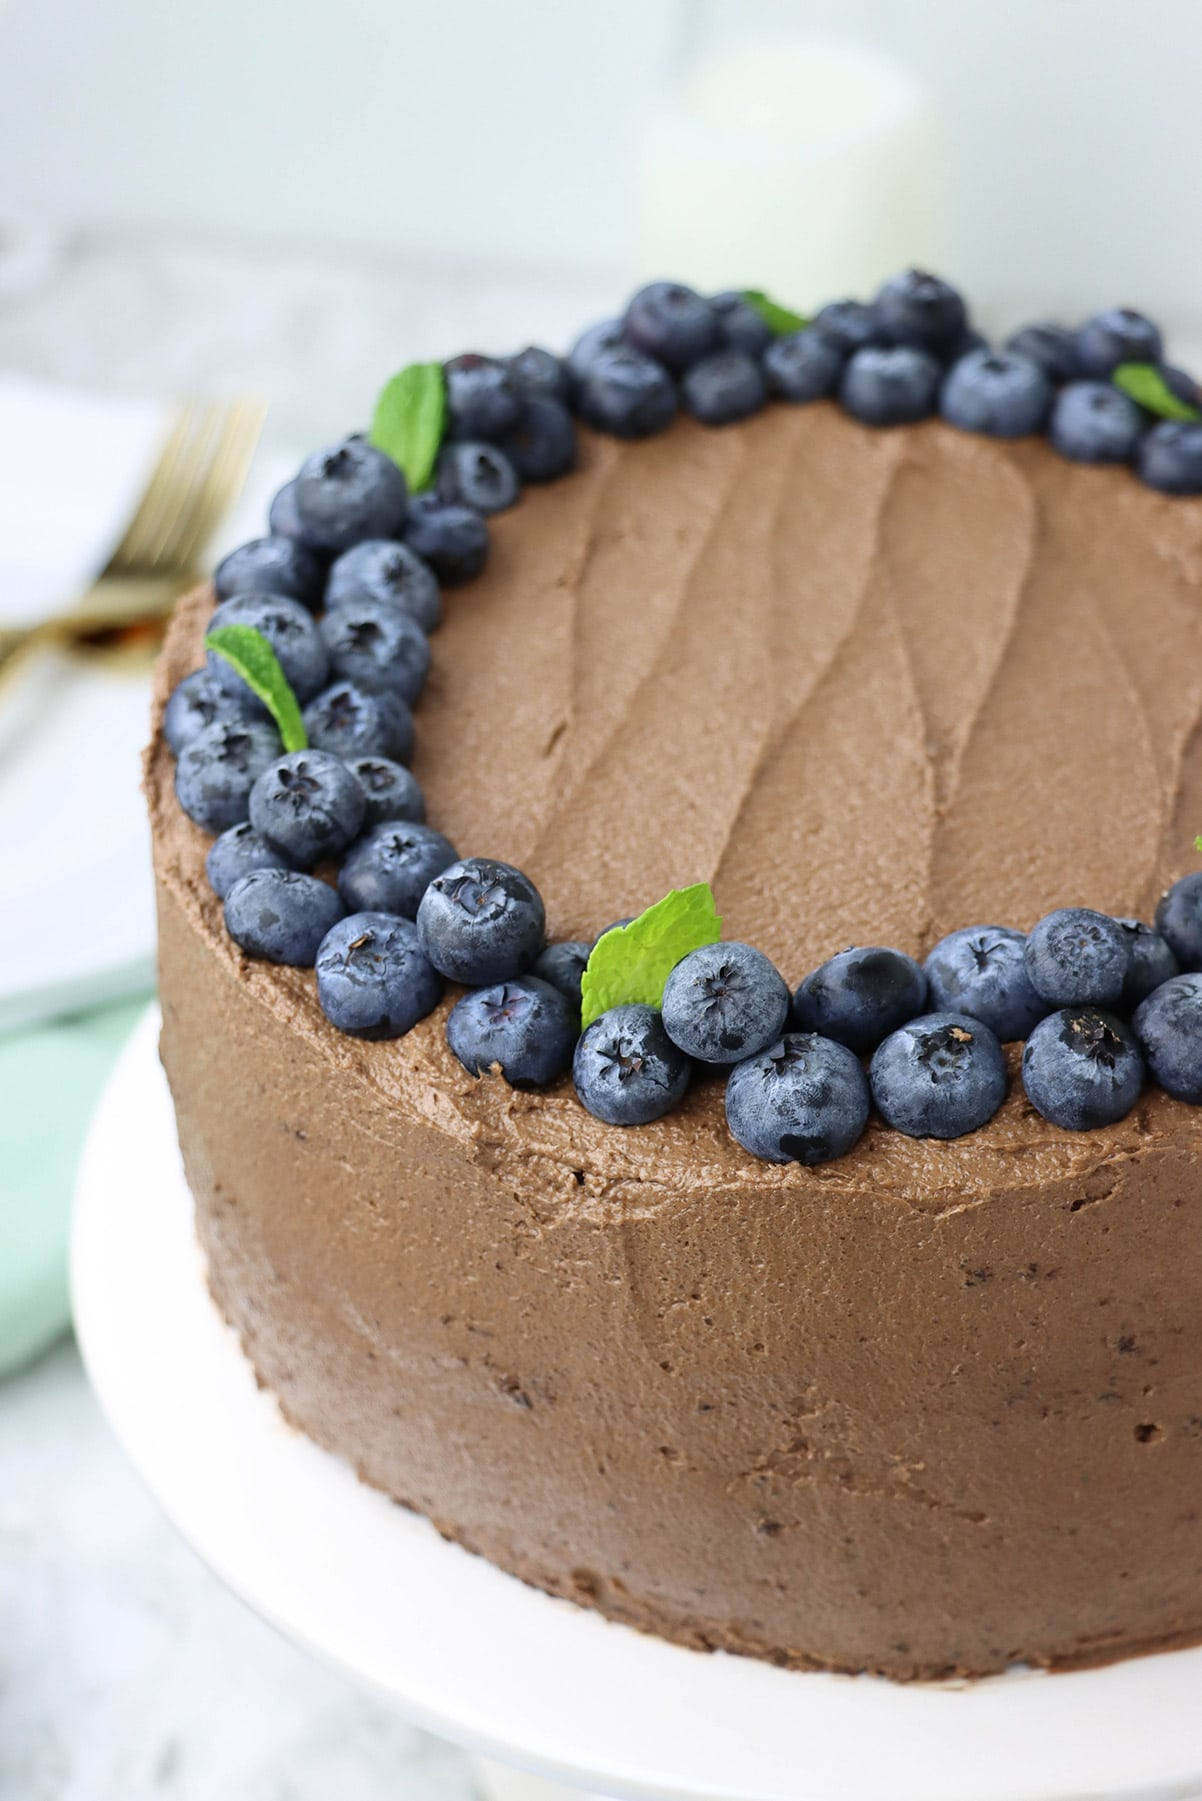 Buttercream Chocolate Cake With Blueberries Wallpaper